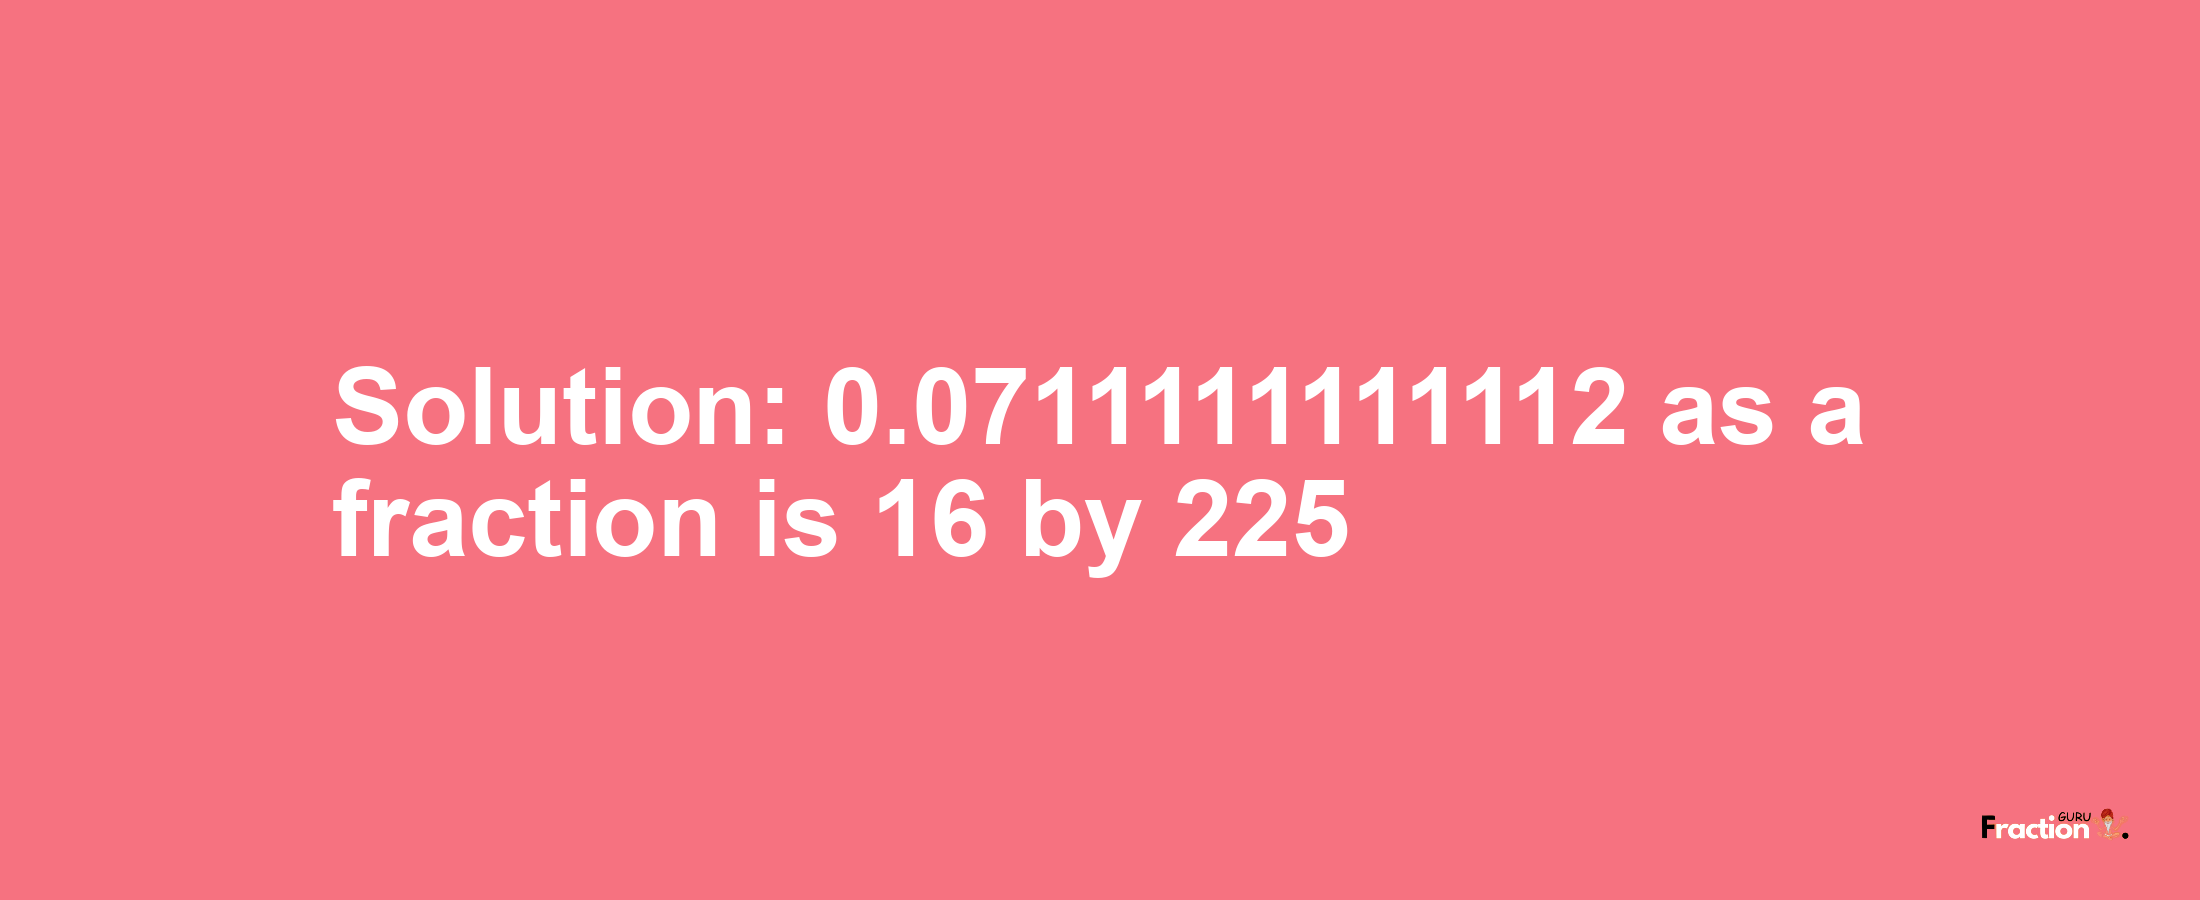 Solution:0.0711111111112 as a fraction is 16/225